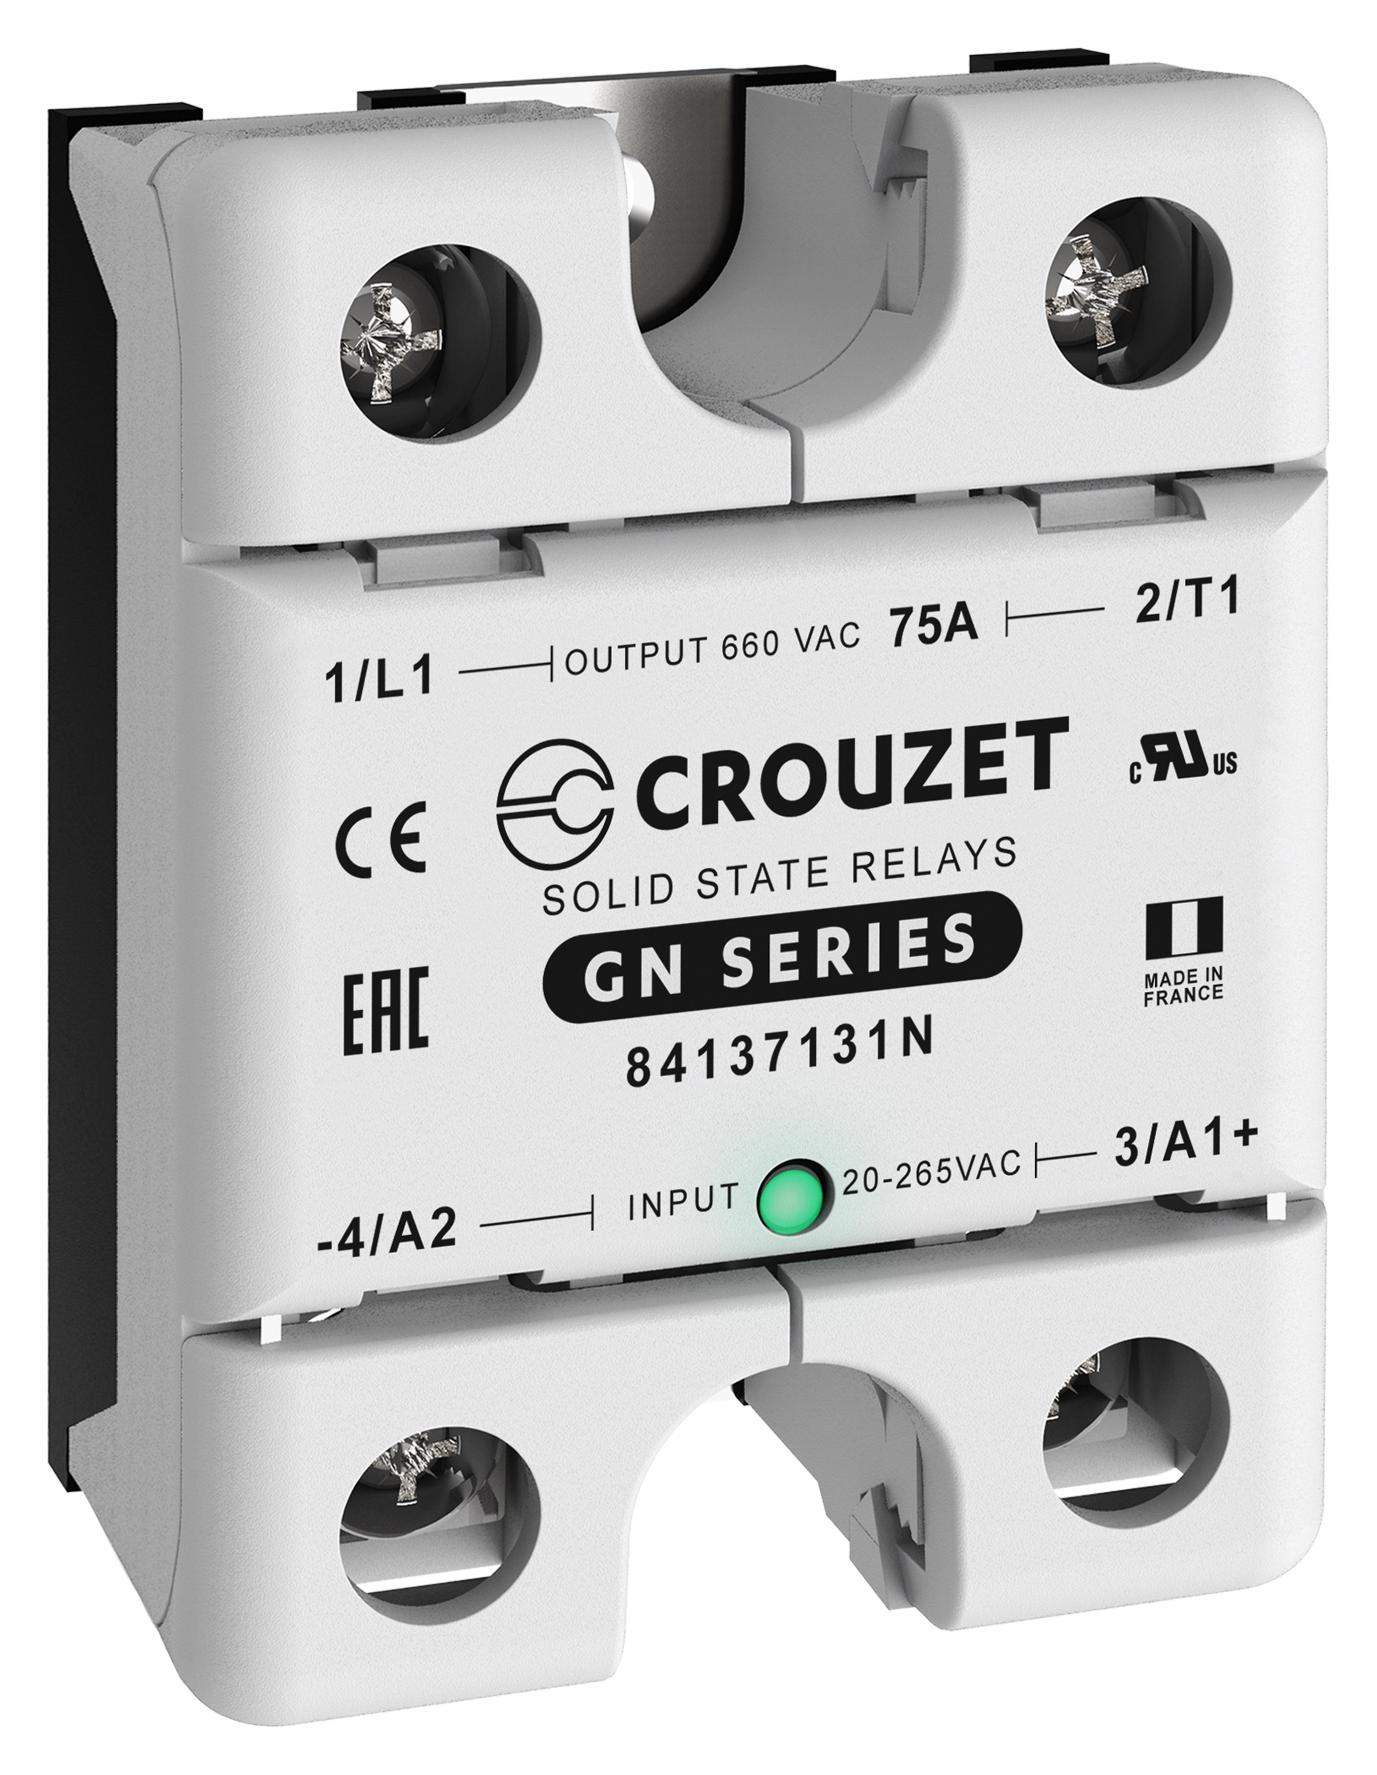 84137131N SOLID STATE RELAY, 75A, 48-660VAC, PANEL CROUZET